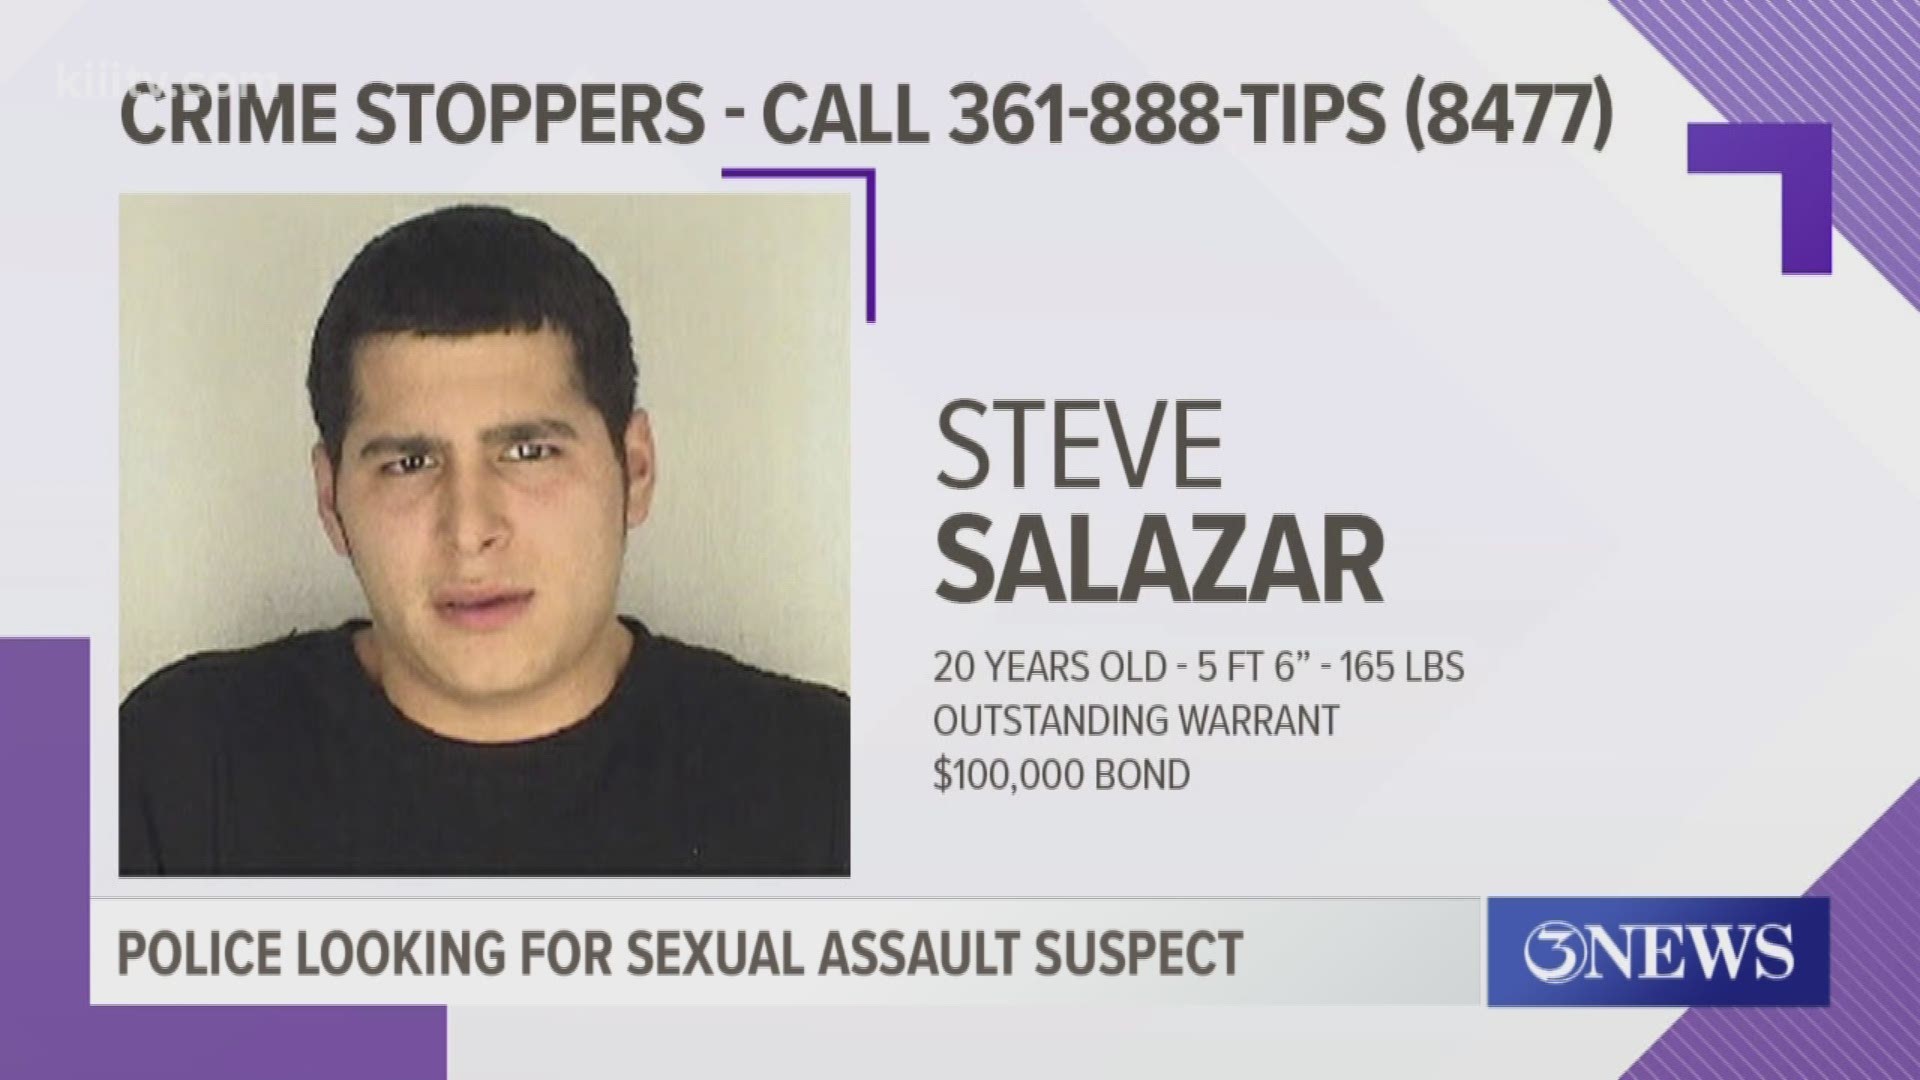 CCPD are on the lookout for a man they say is wanted for the sexual assault of a child.